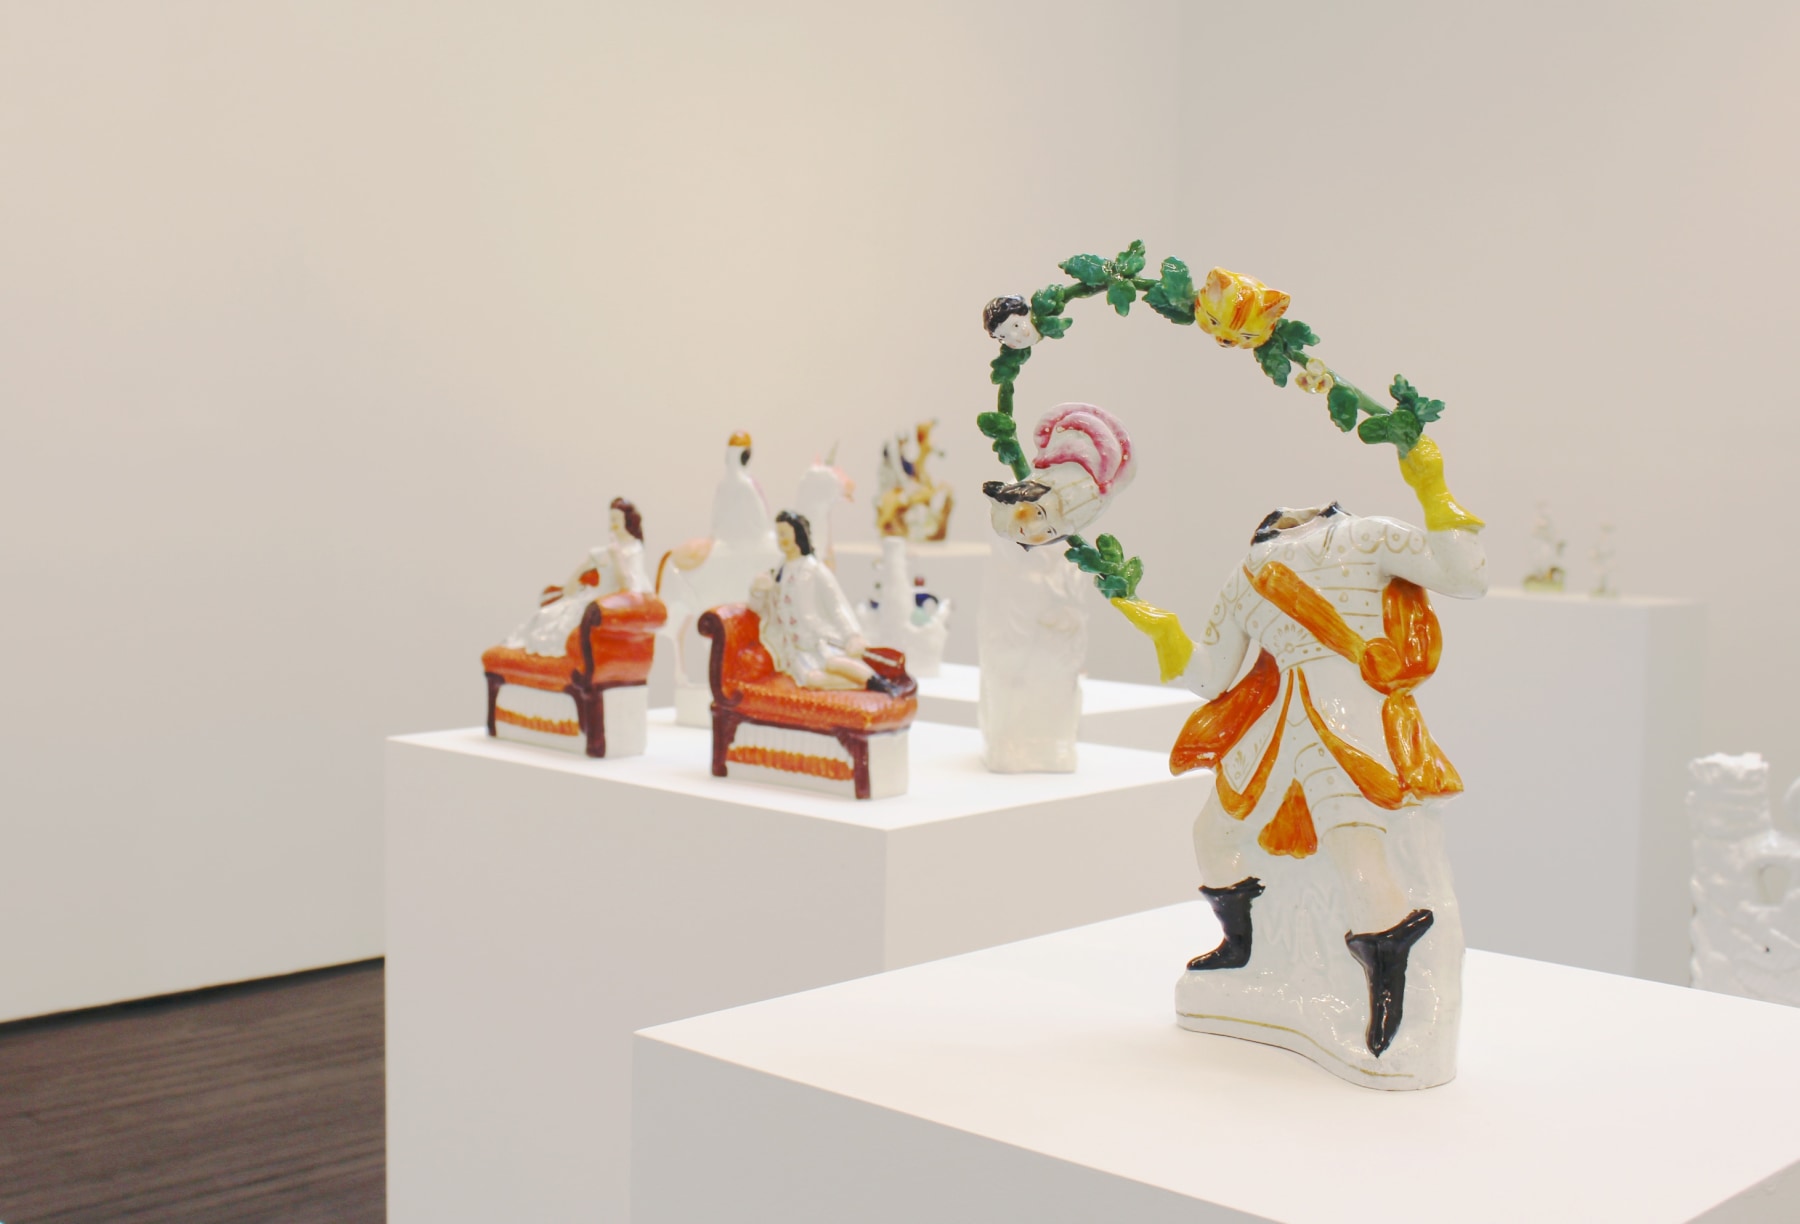 Installation view of The Unfortunate Souvenirs of Our Time